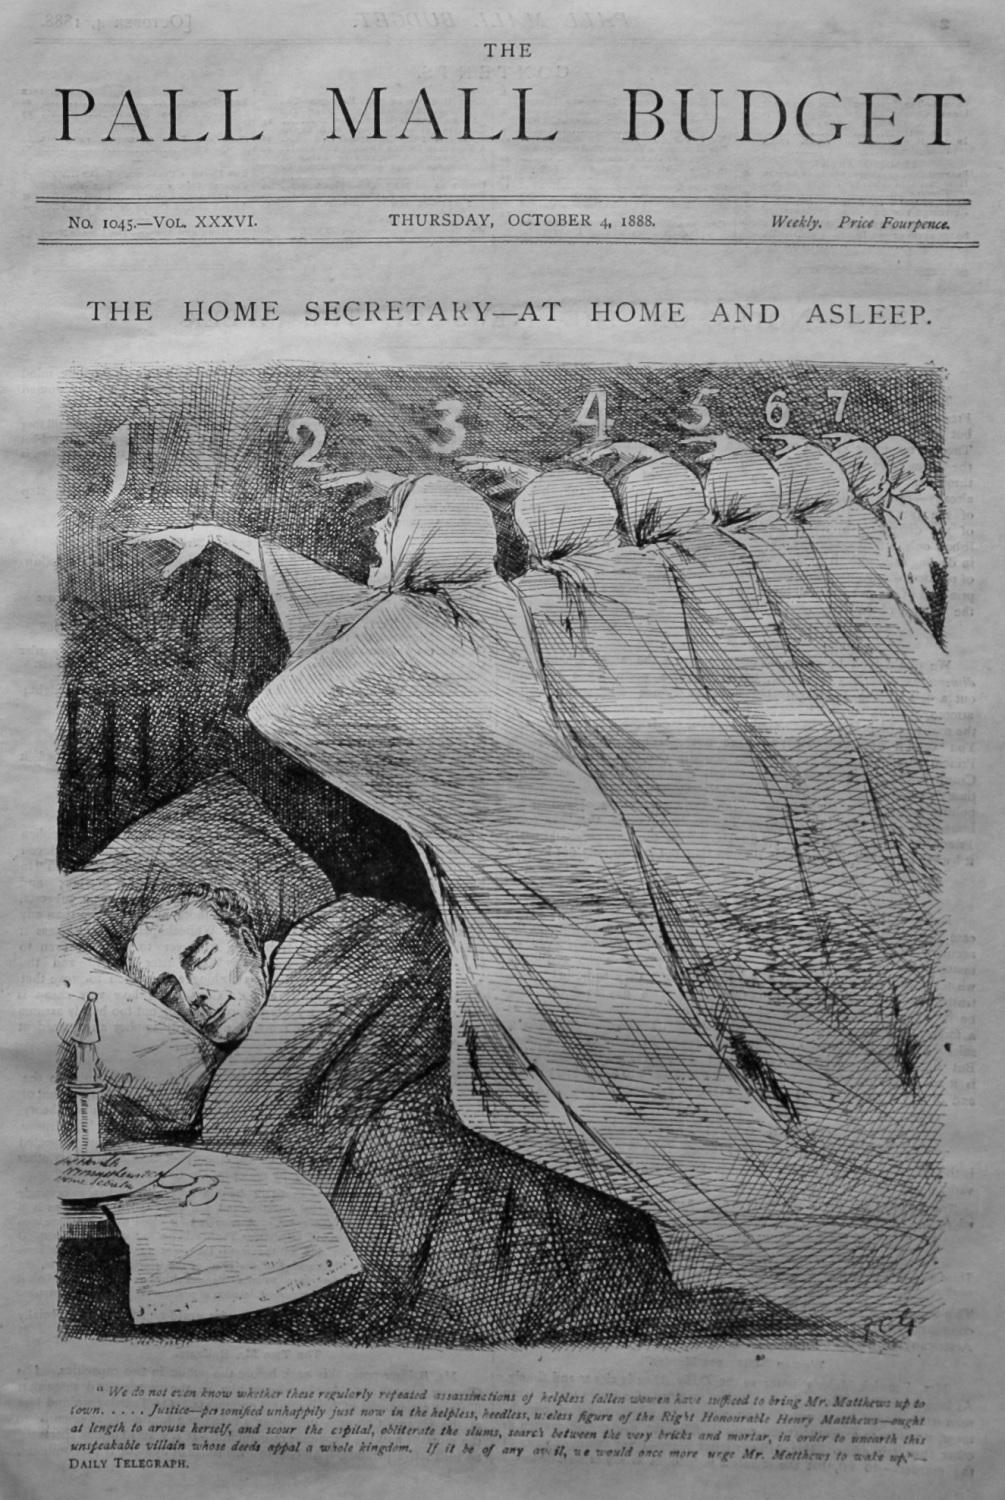 The Pall Mall Budget. (Front Page) The Home Secretary - At Home and Asleep.